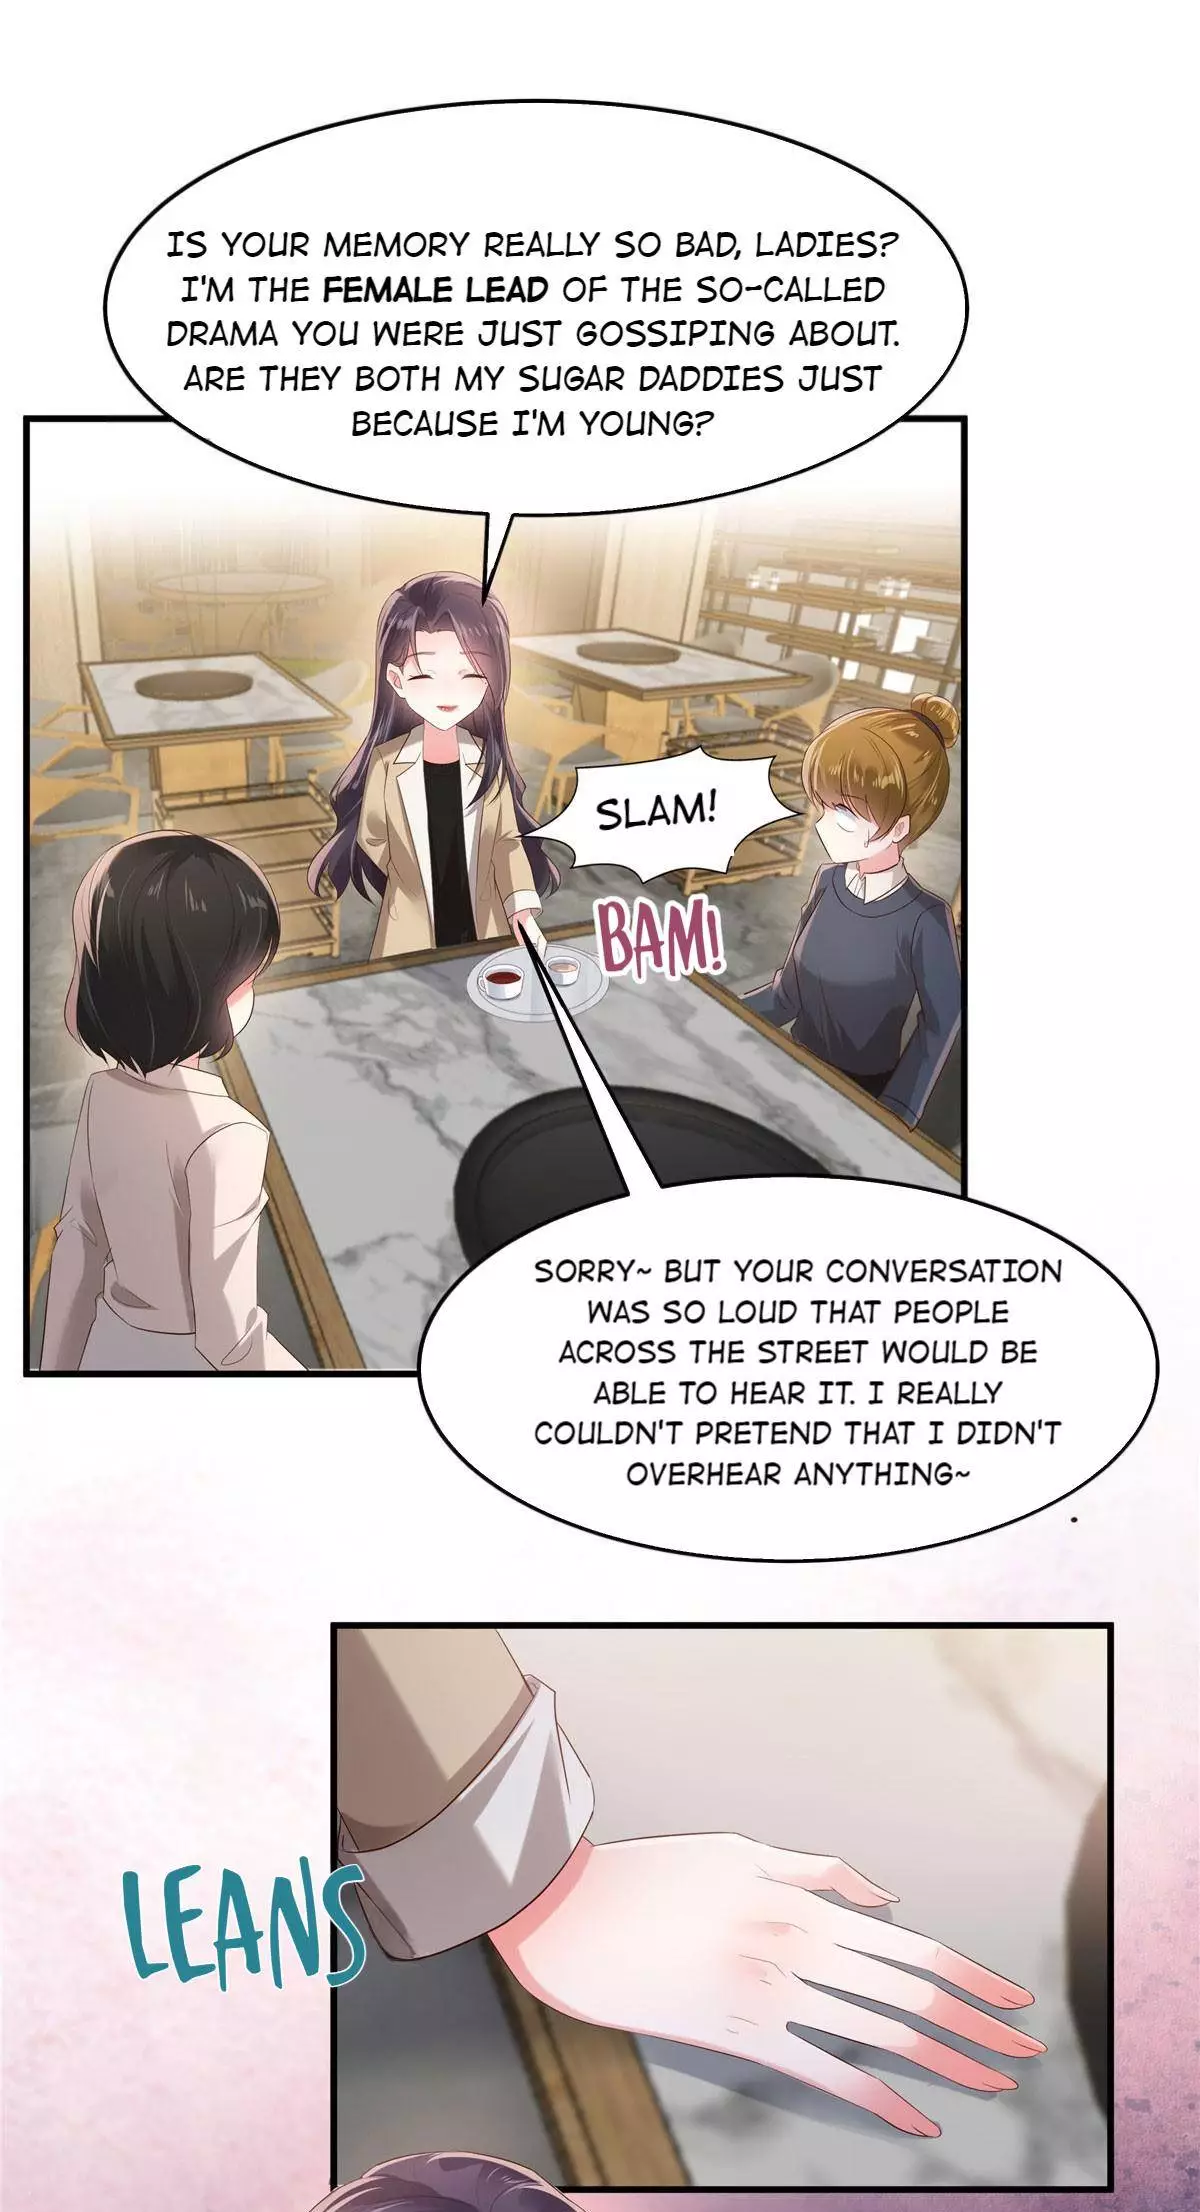 Rebirth Meeting: For You And My Exclusive Lovers - 107 page 9-28f47c8f